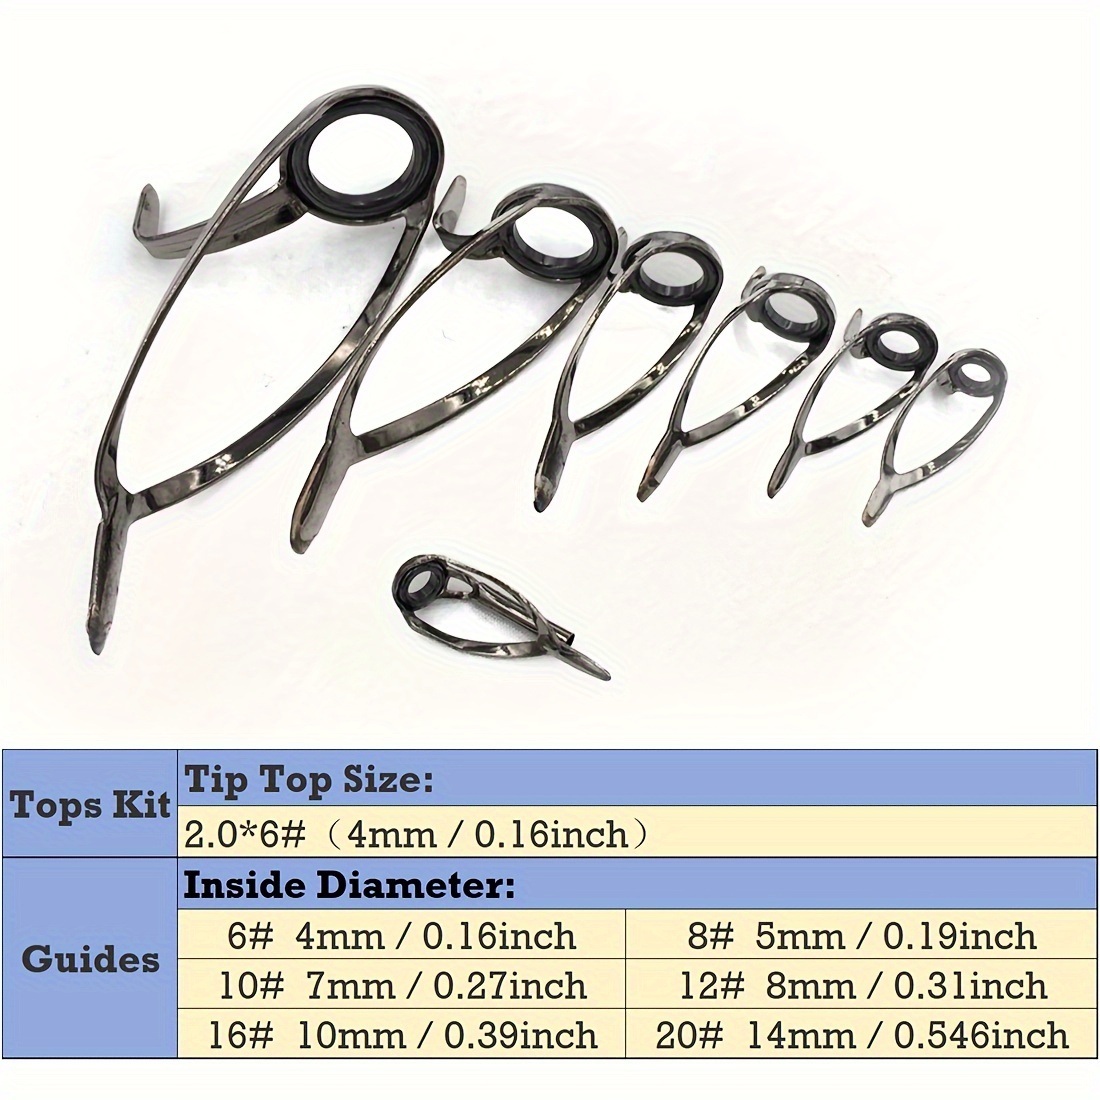 35pcs Fishing Rod Guides, Repair Kit, Stainless Steel Fishing Tackle,  Suitable For Saltwater And Freshwater Fishing